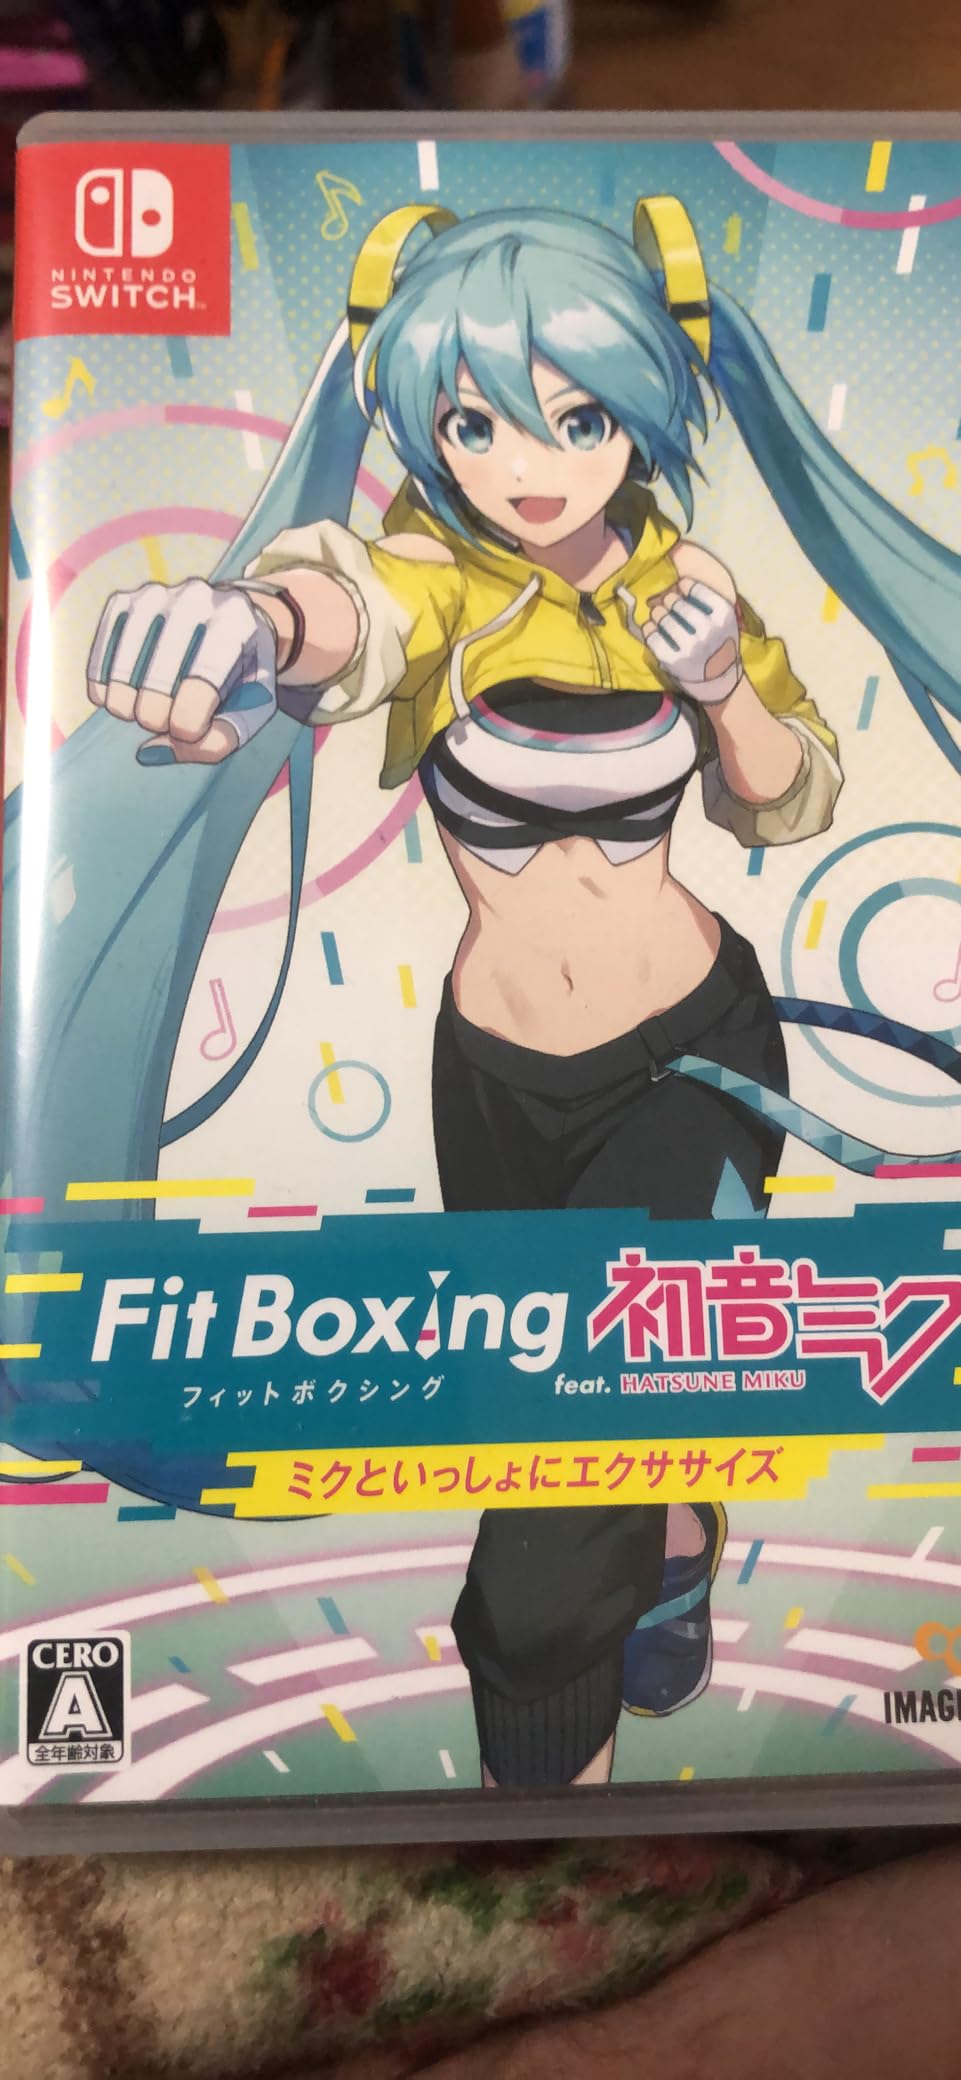 A good Fit Boxing game.